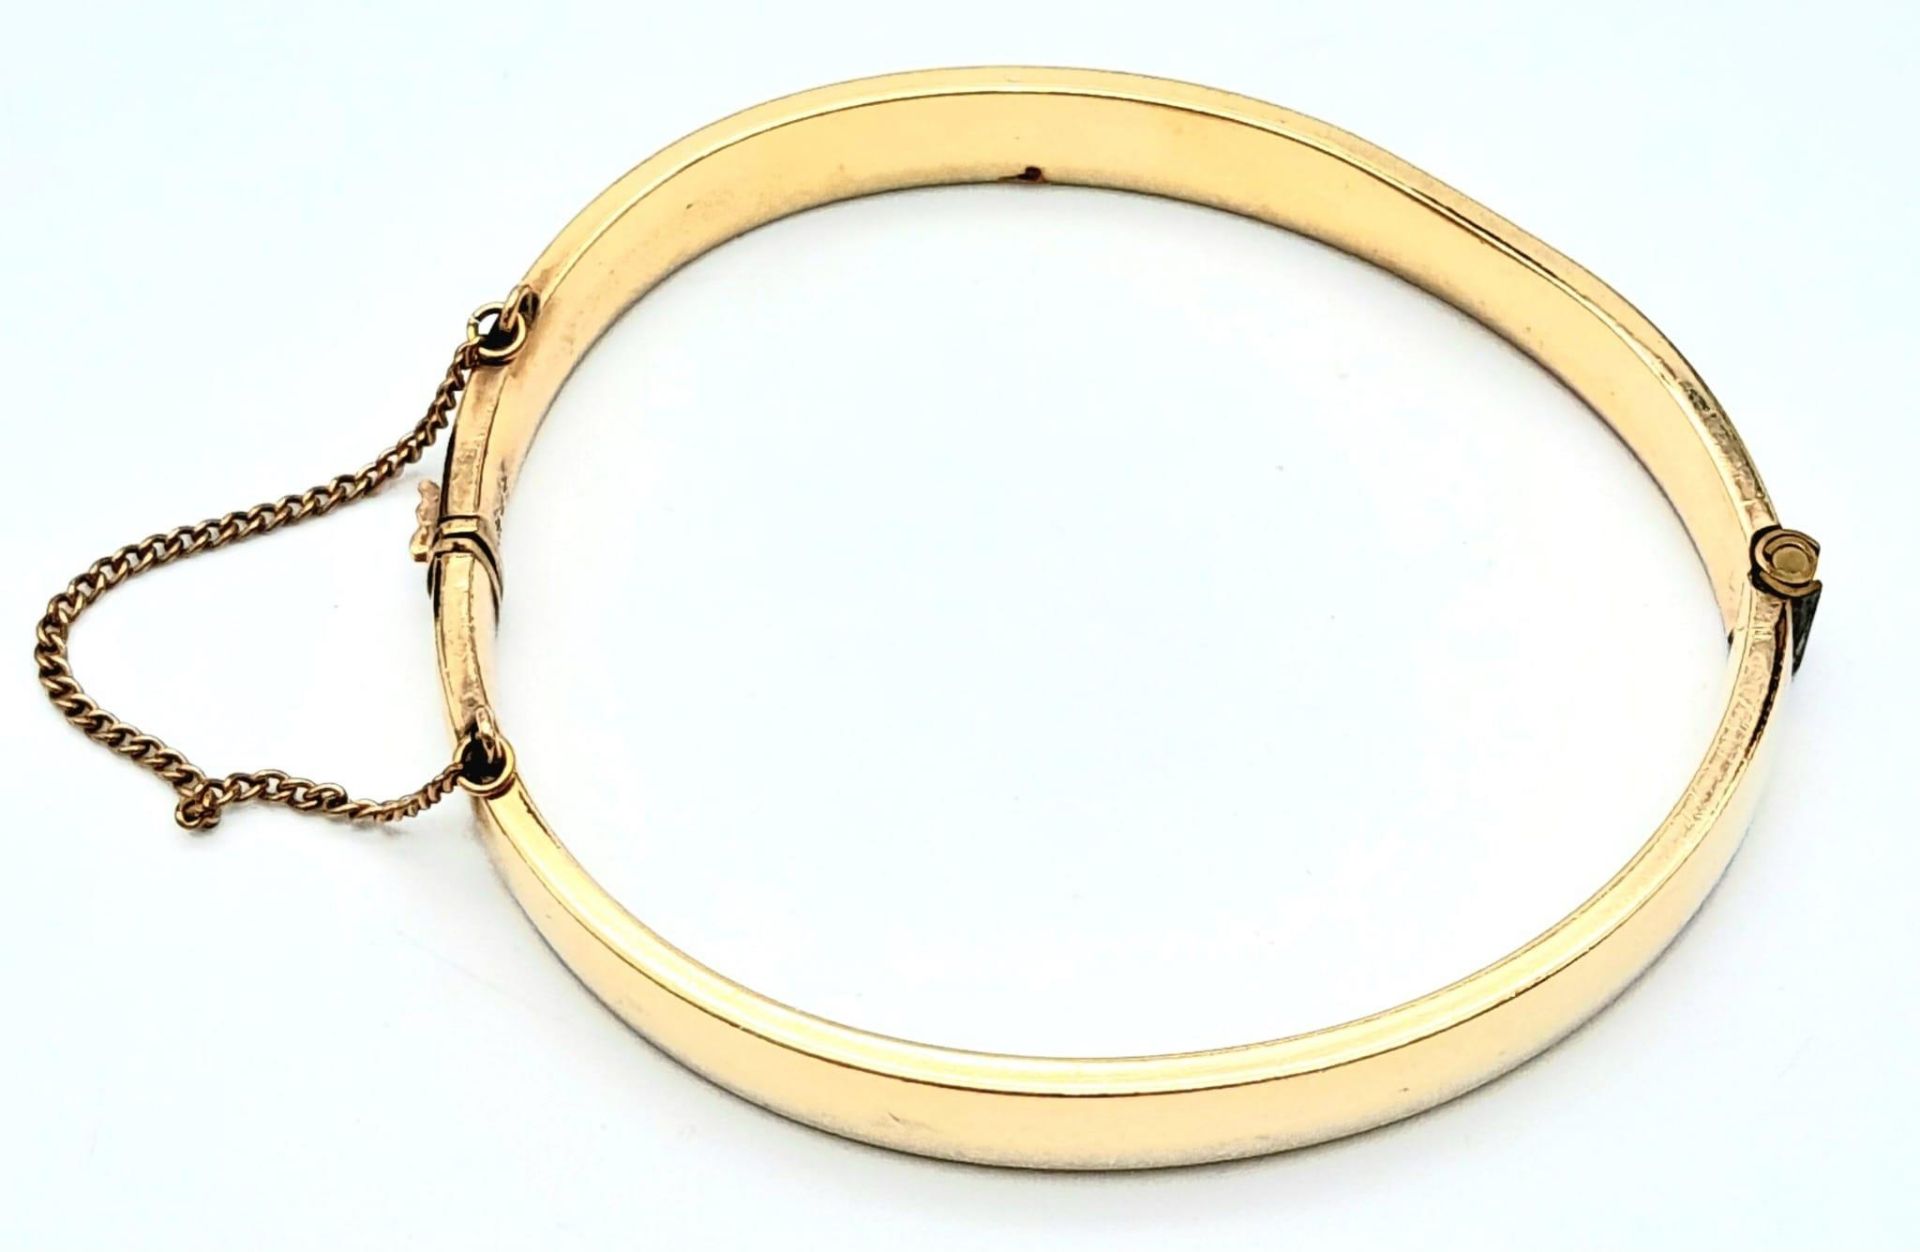 A Vintage 9K (1/5 gold plated) Decorative Bangle. 11.26g total weight. - Image 6 of 12